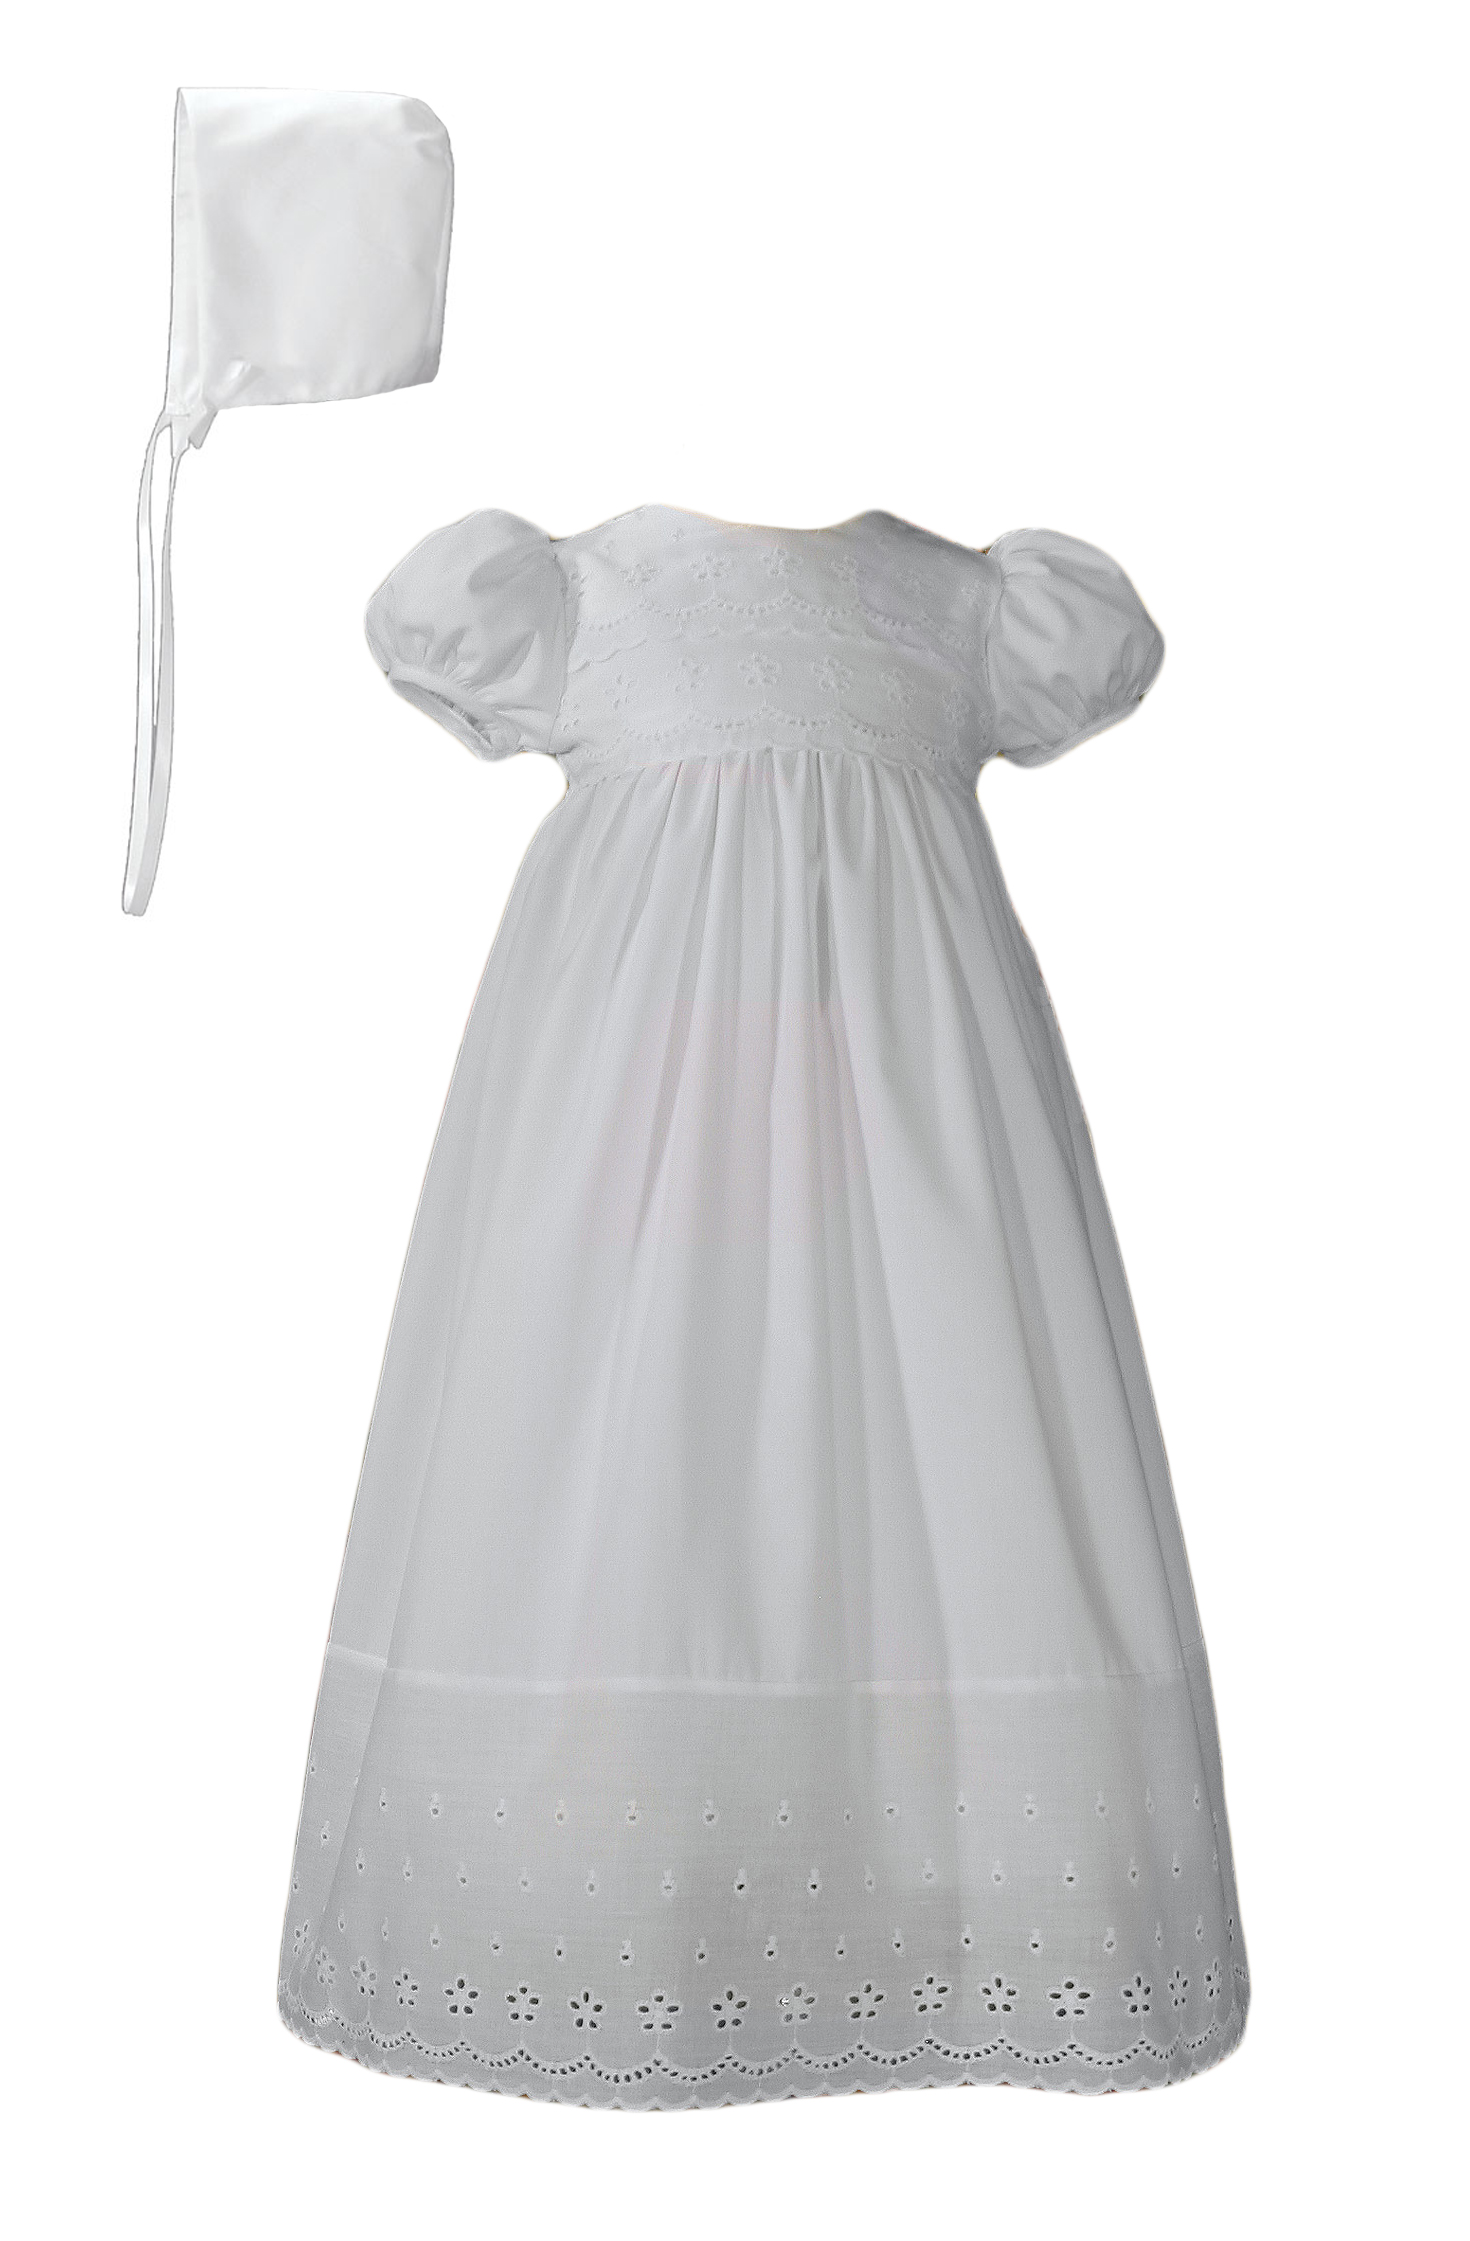 Girls White Poly Cotton Christening Baptism Gown with Lace Border and Bonnet - Little Things Mean a Lot